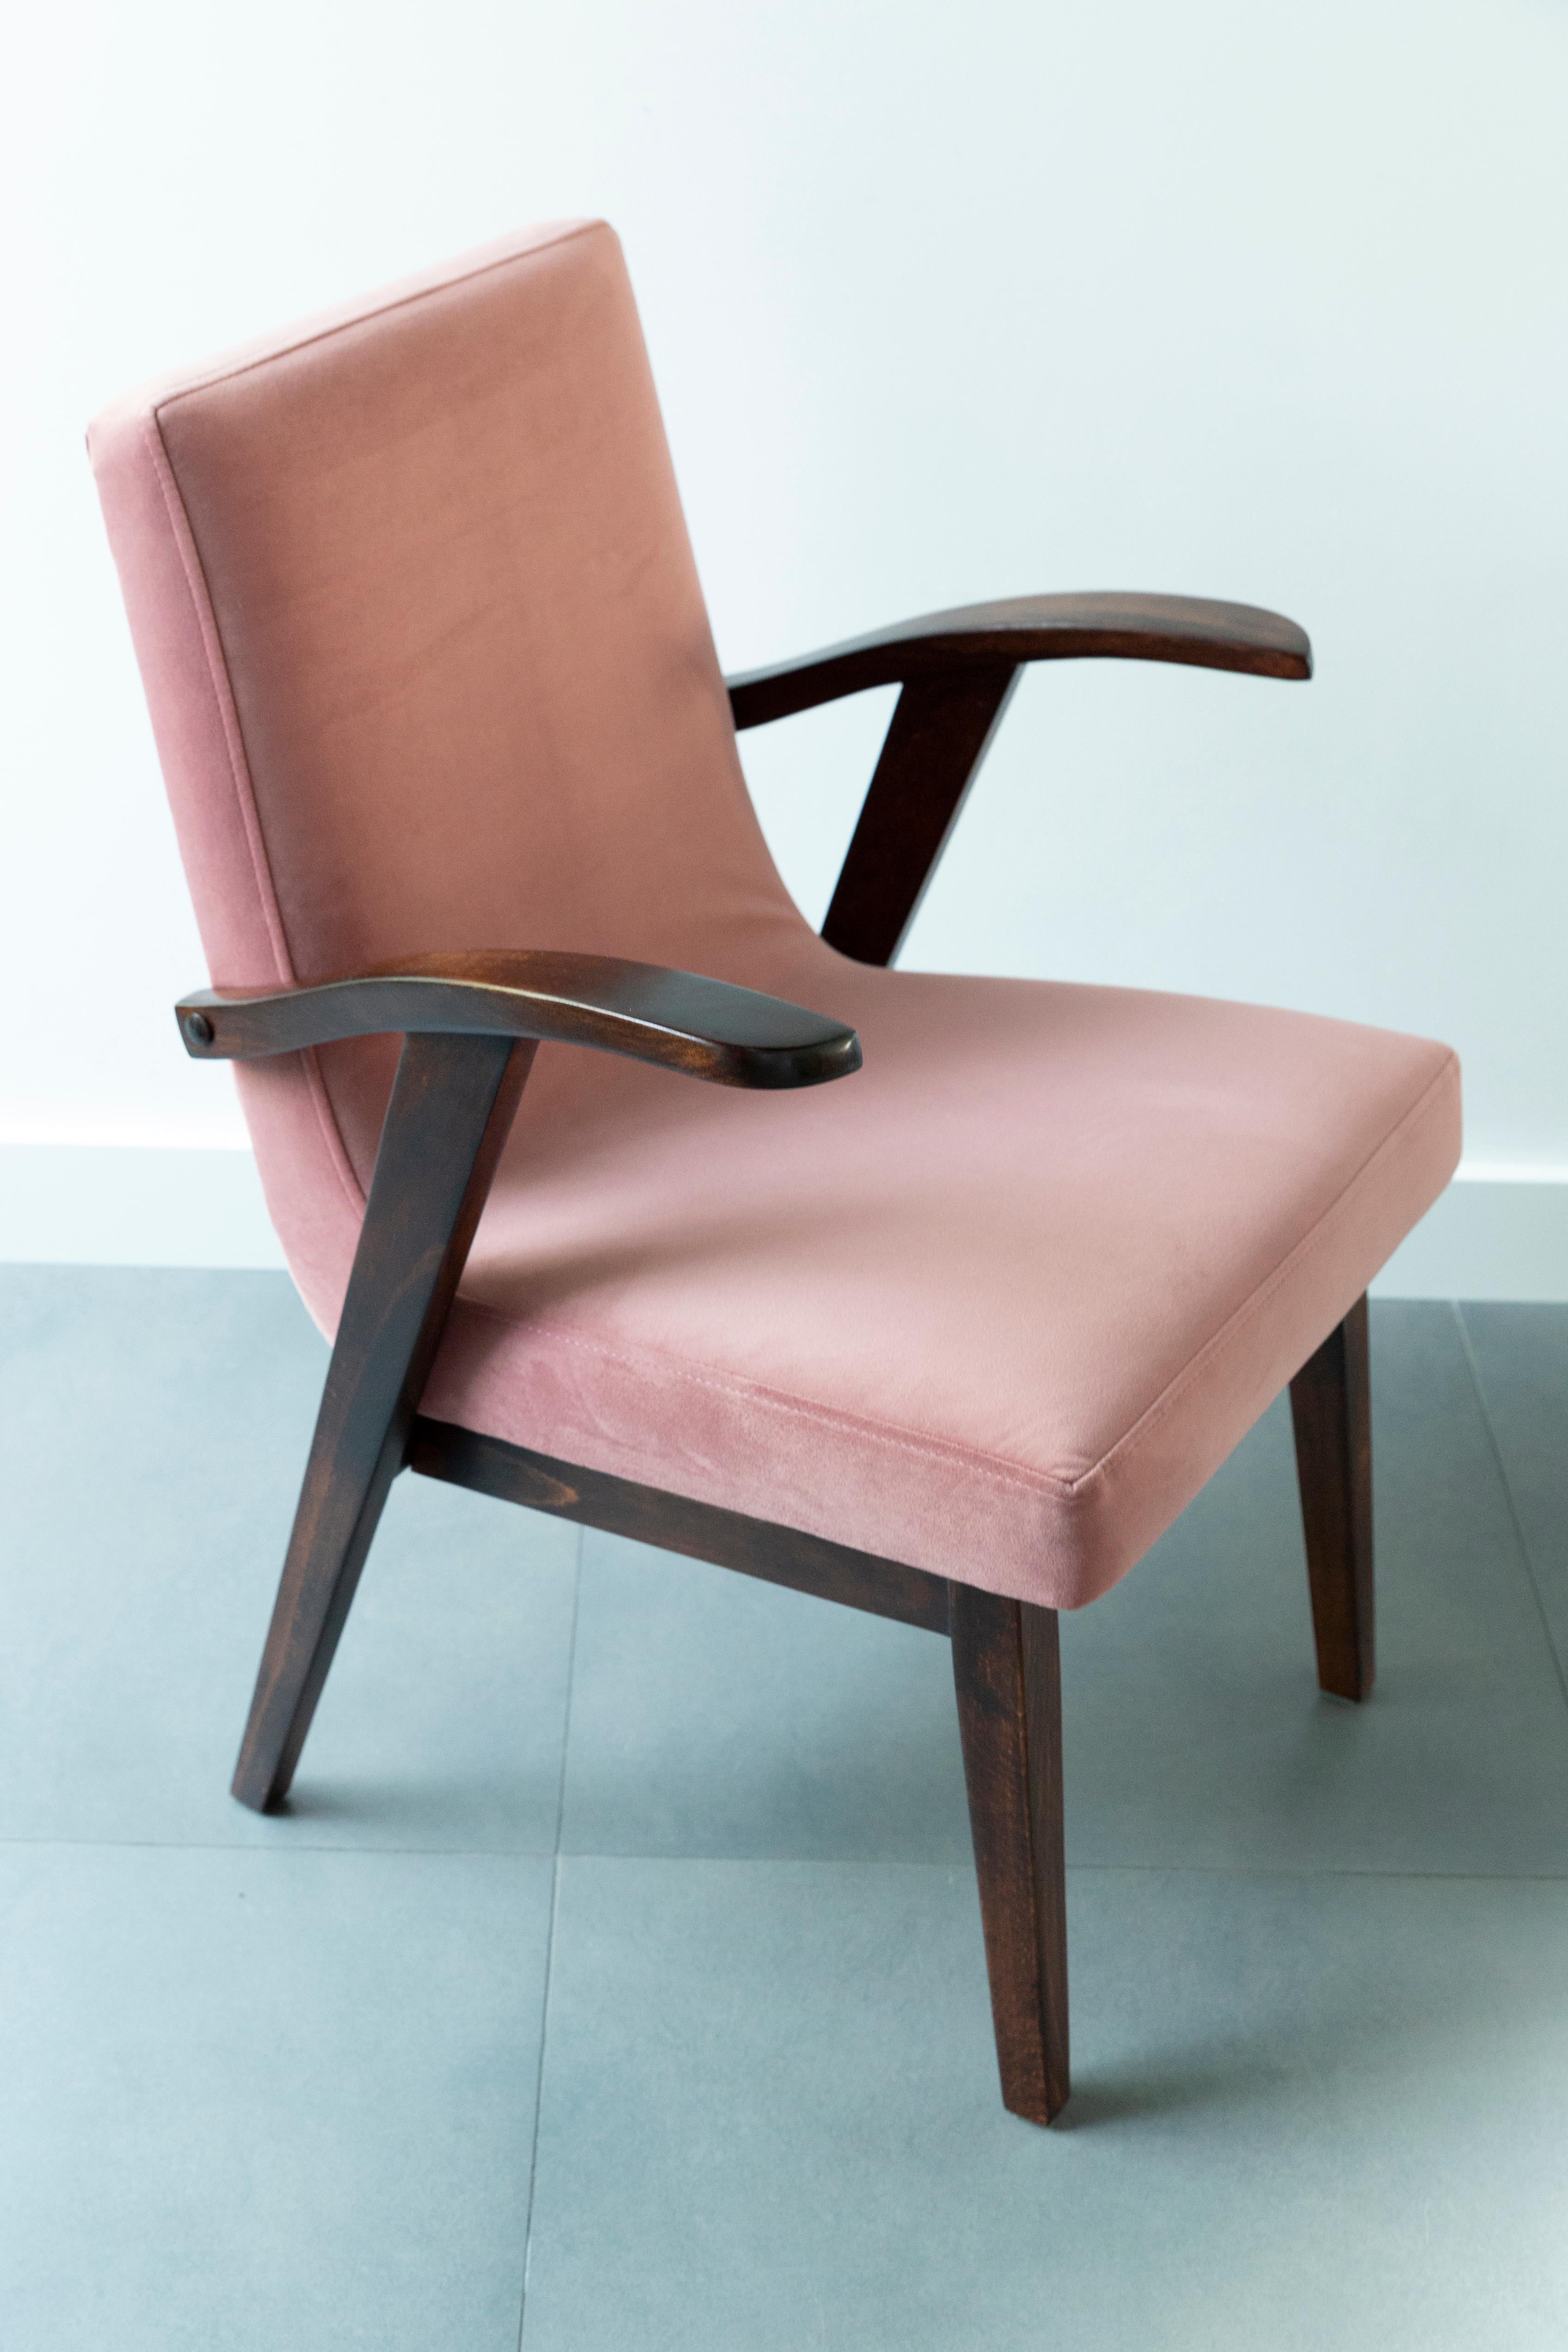 Hand-Crafted 20th Century Vintage Armchair in Dusty Pink Velvet by Mieczyslaw Puchala, 1960s For Sale